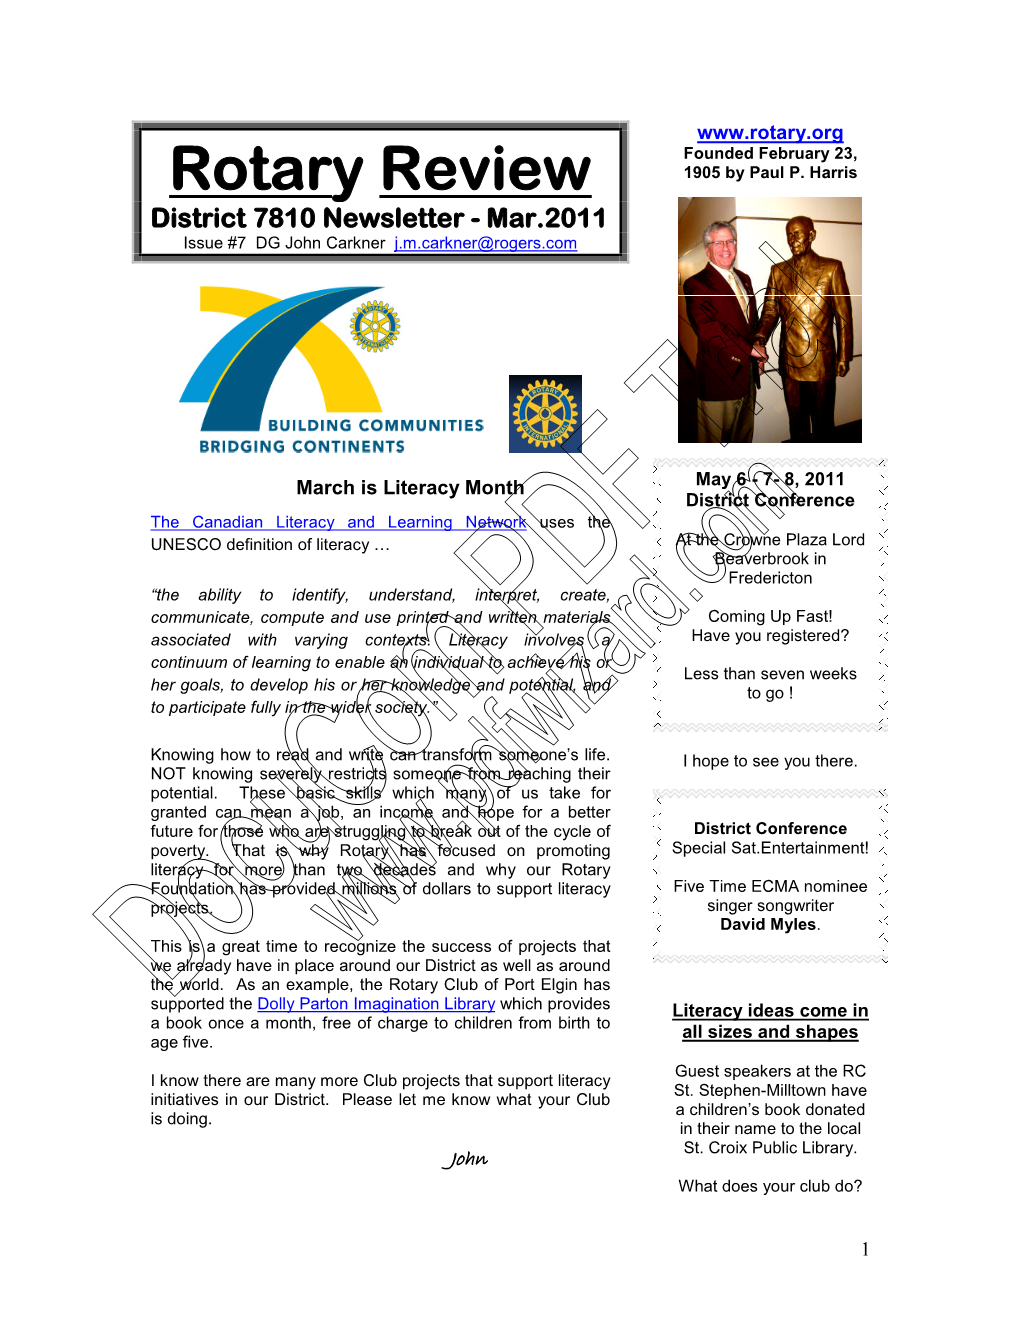 Rotary Review 1905 by Paul P